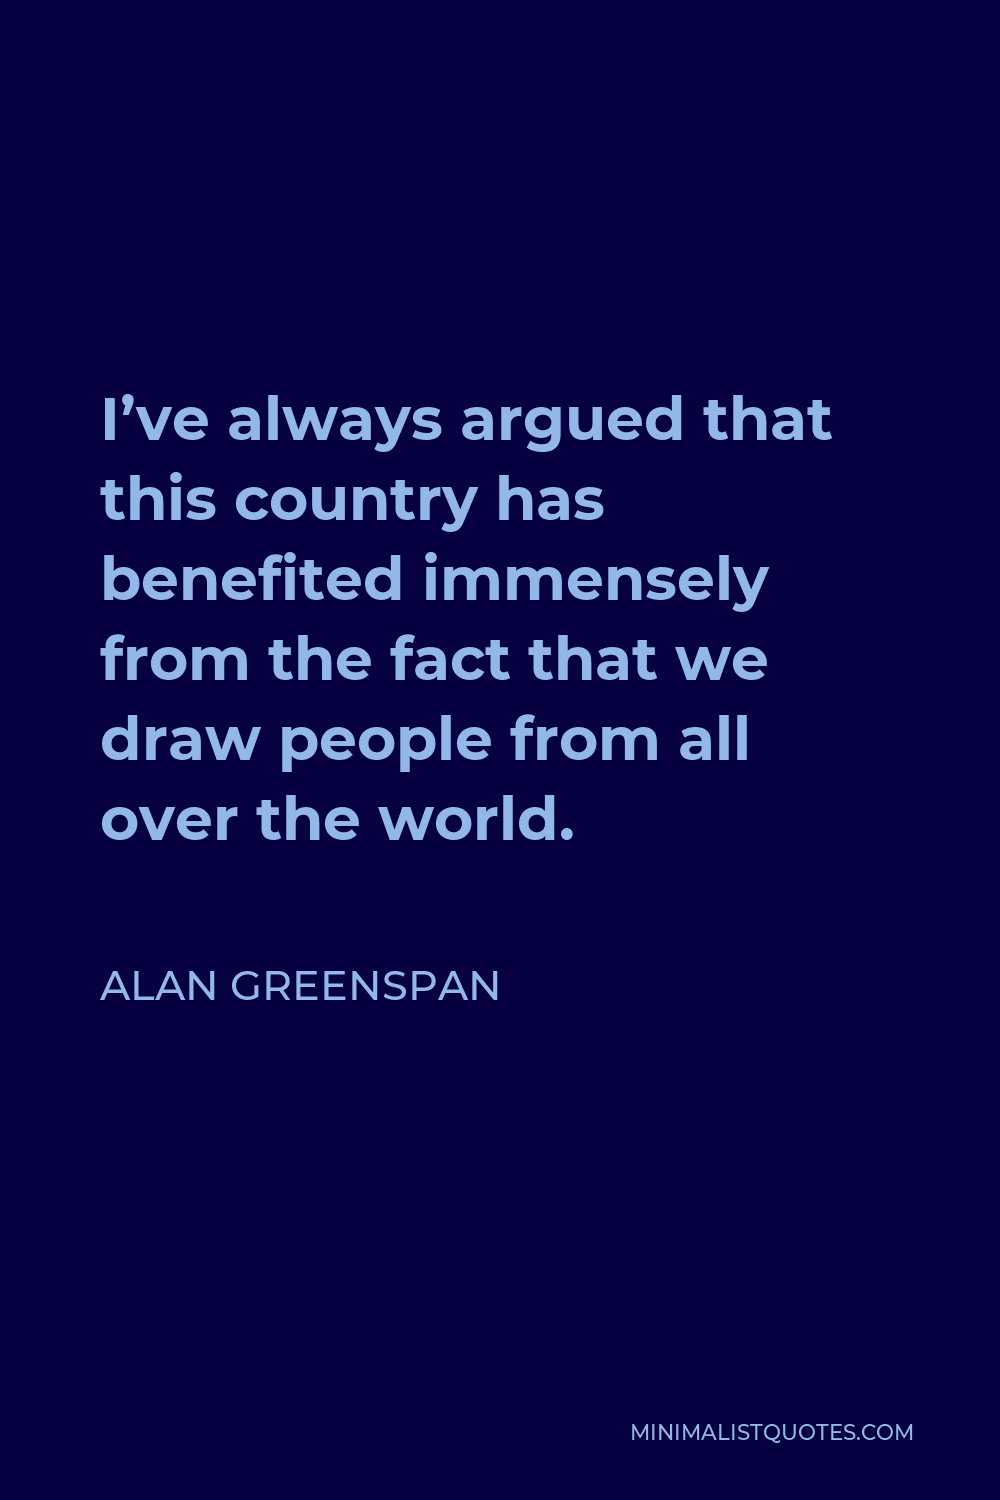 Alan Greenspan Quote - I’ve always argued that this country has benefited immensely from the fact that we draw people from all over the world.